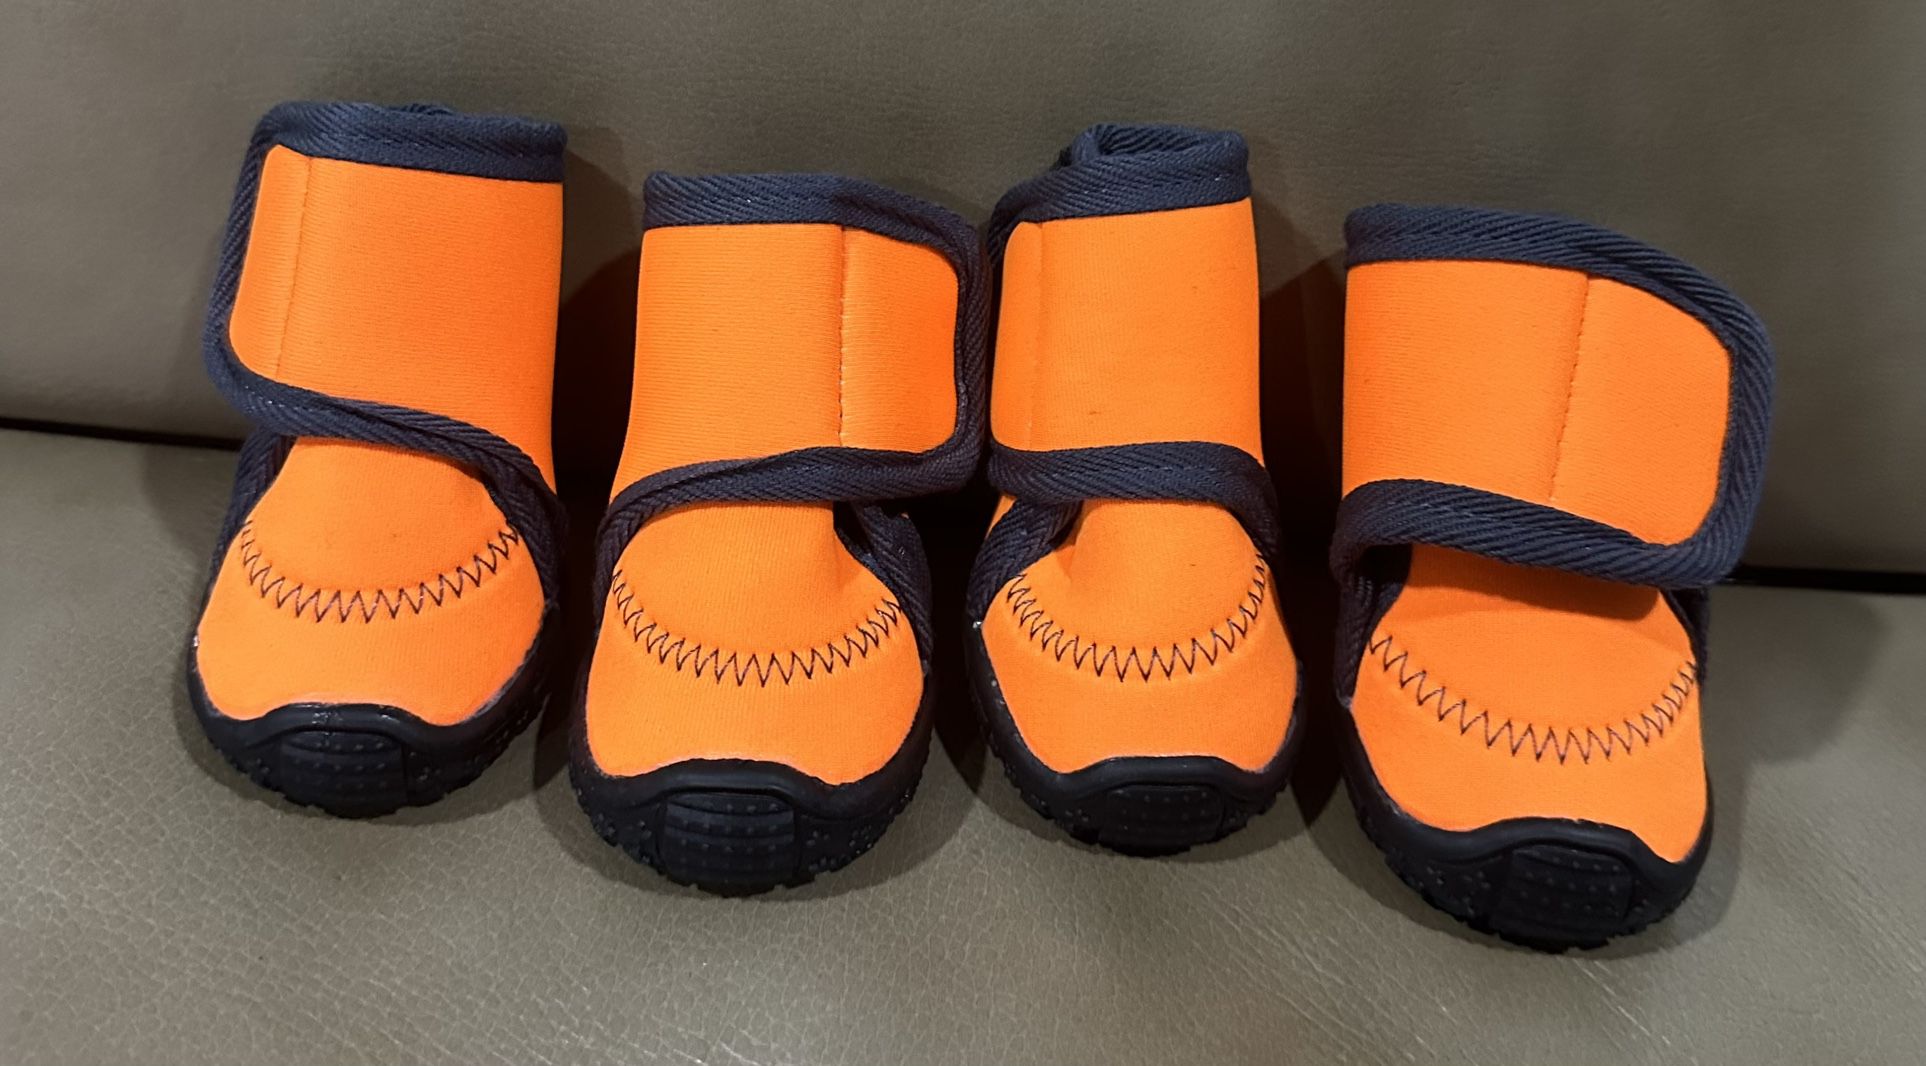  (Small) 4Pcs Waterproof Dog Shoes Adjustable Straps and Rugged Anti-Slip Sole Paw Protectors Easy to Wear   